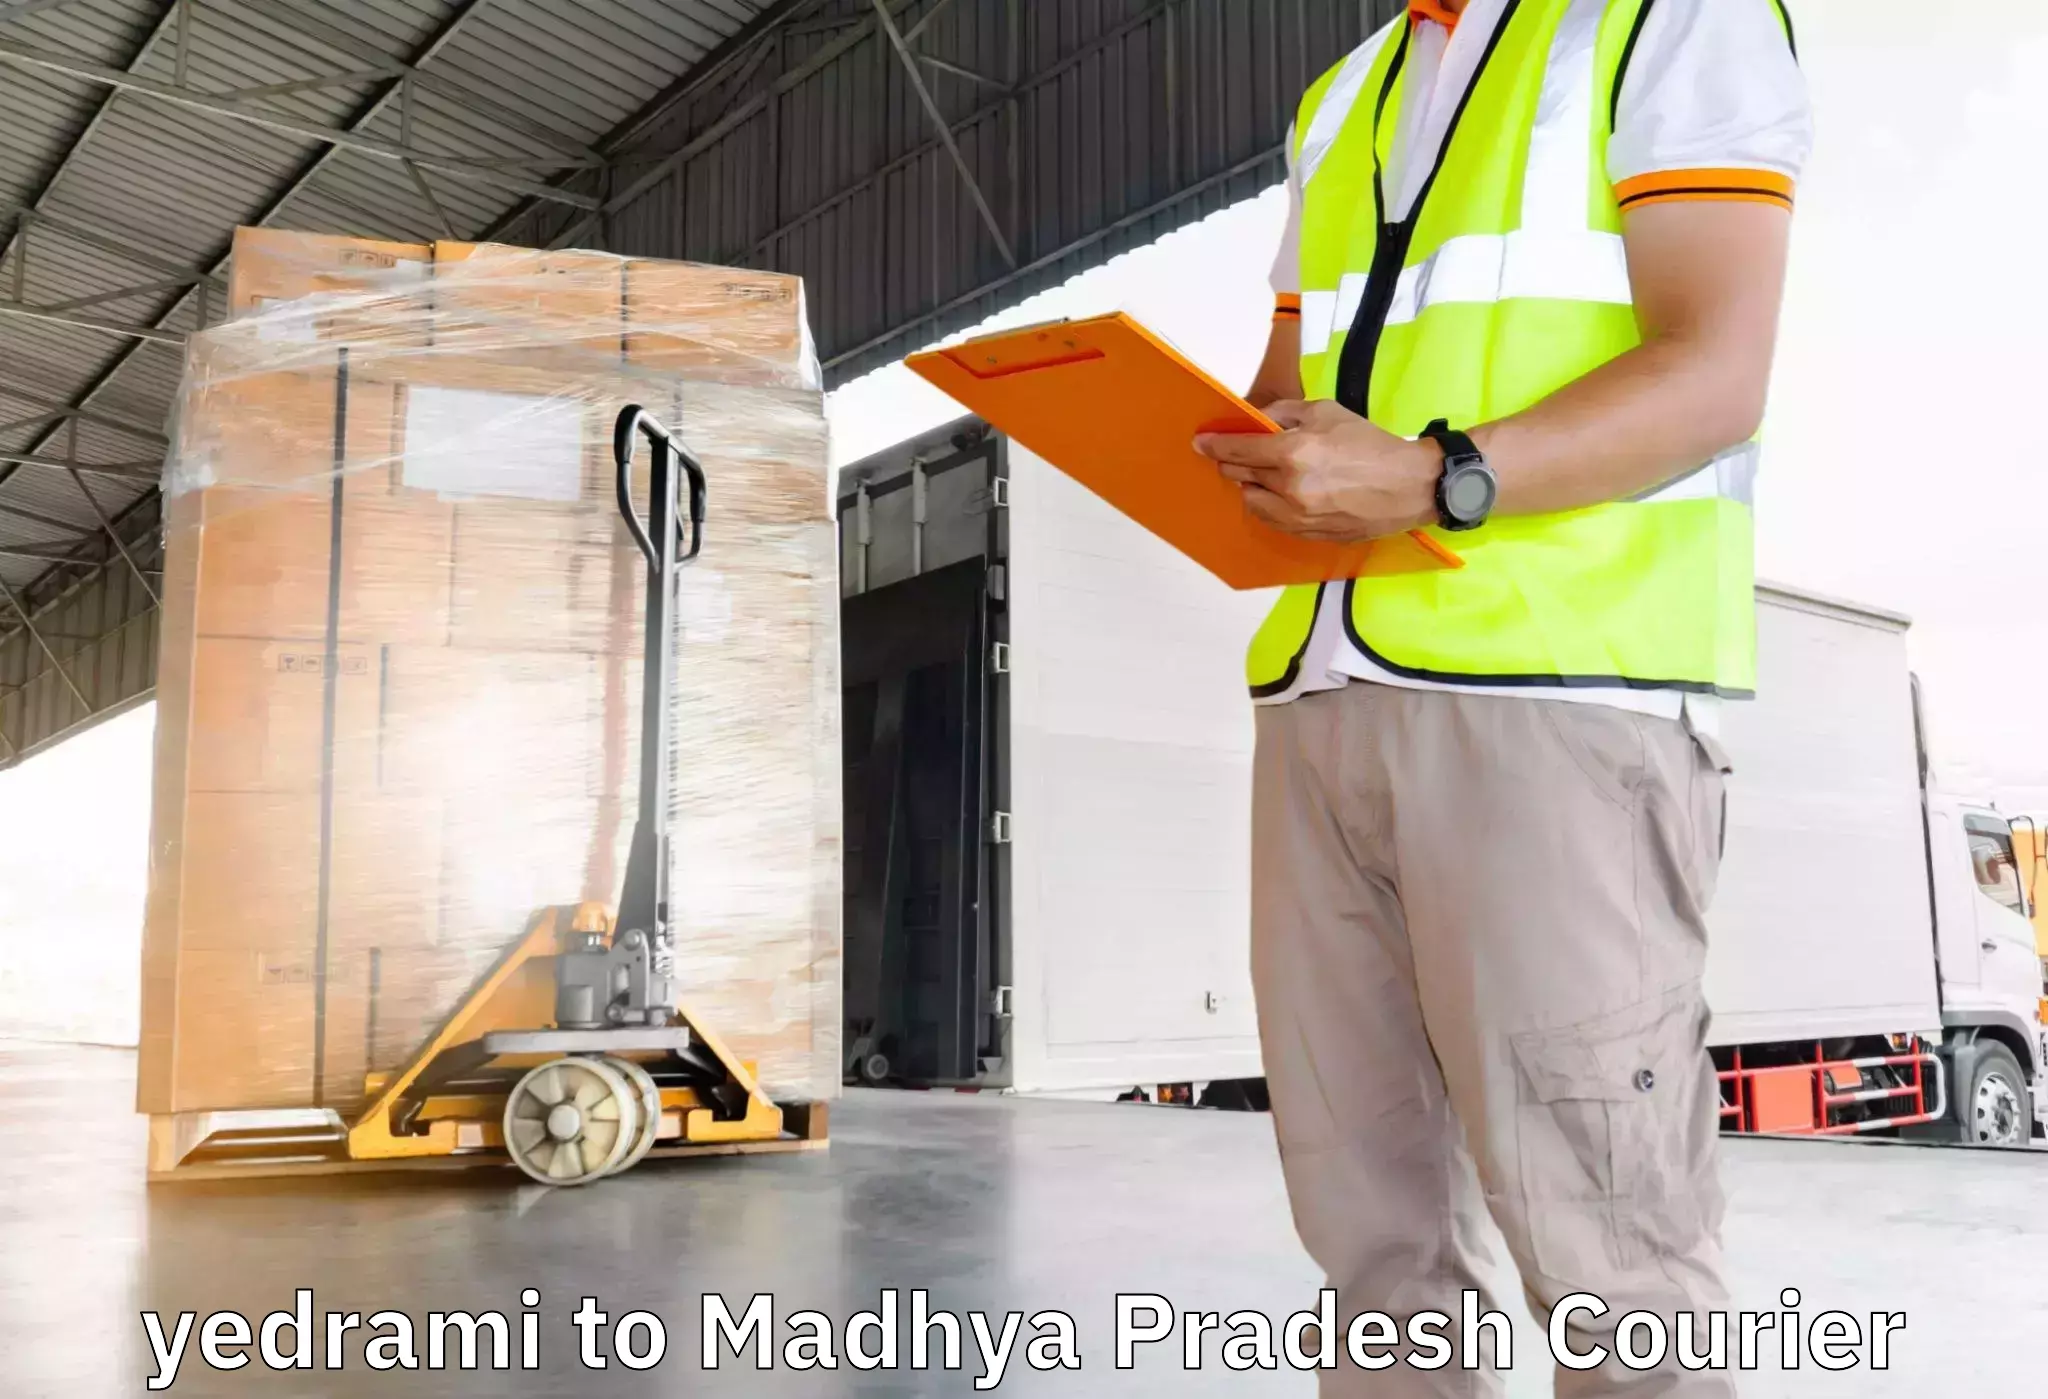 Professional relocation services yedrami to Bhind